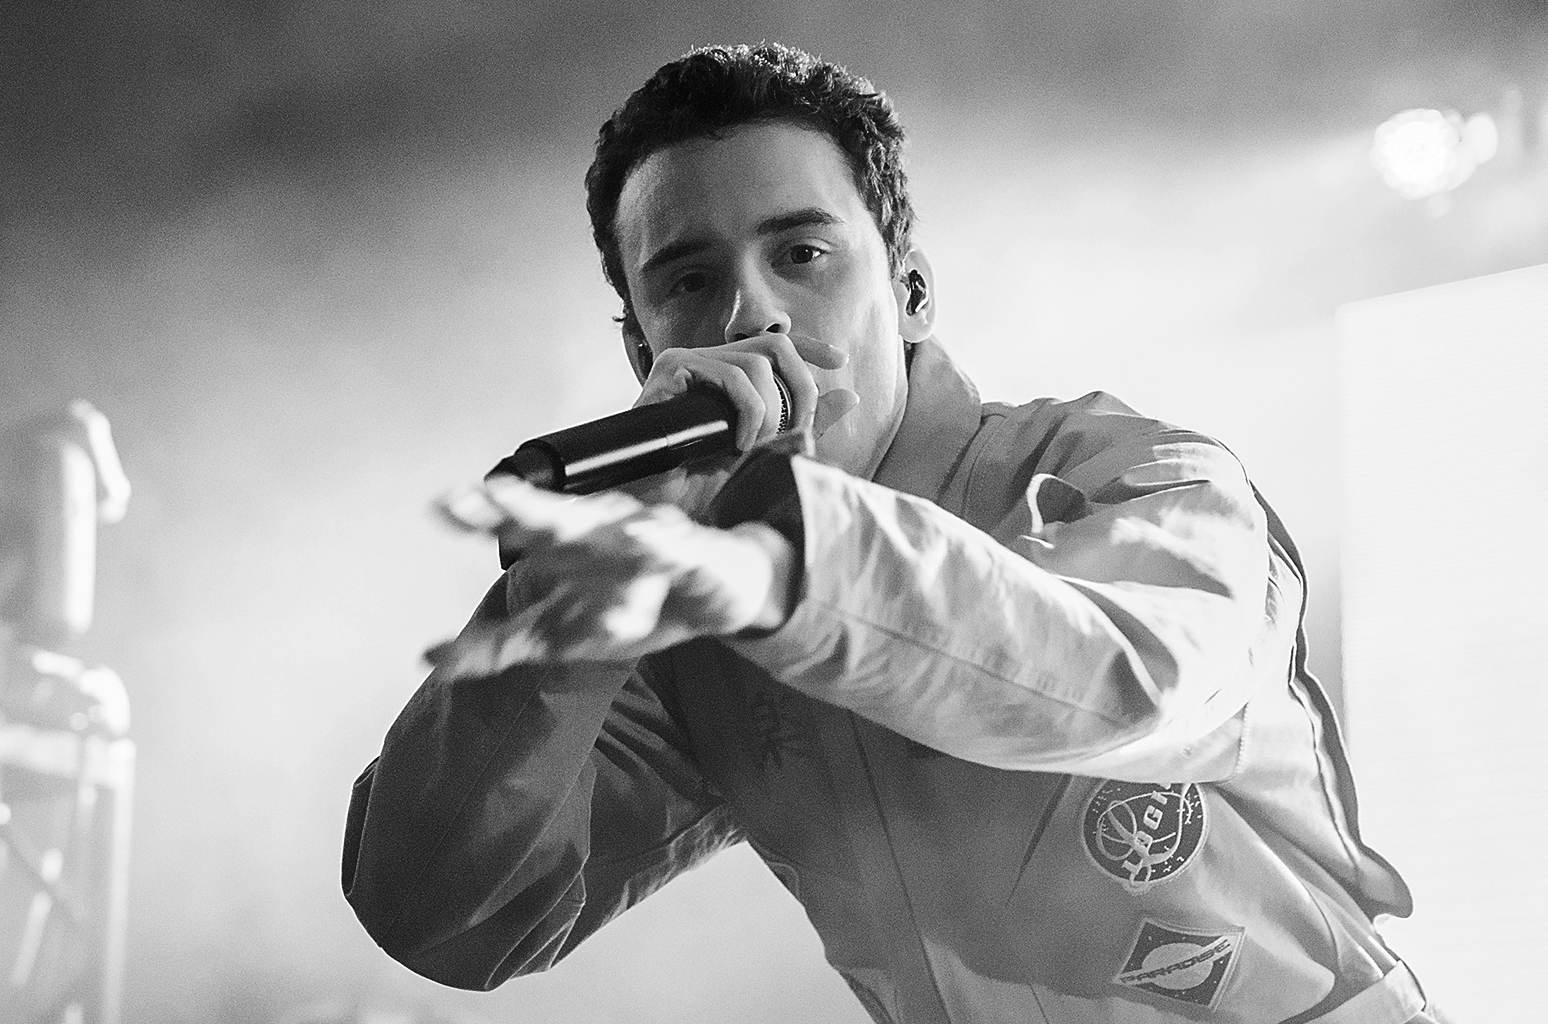 AUSTIN, TX - MARCH 25:  (EDITORS NOTE: Image has been converted to black and white.) Rapper Logic performs in concert at Stubb's Bar-B-Q on March 25, 2016 in Austin, Texas.  (Photo by Rick Kern/WireImage)